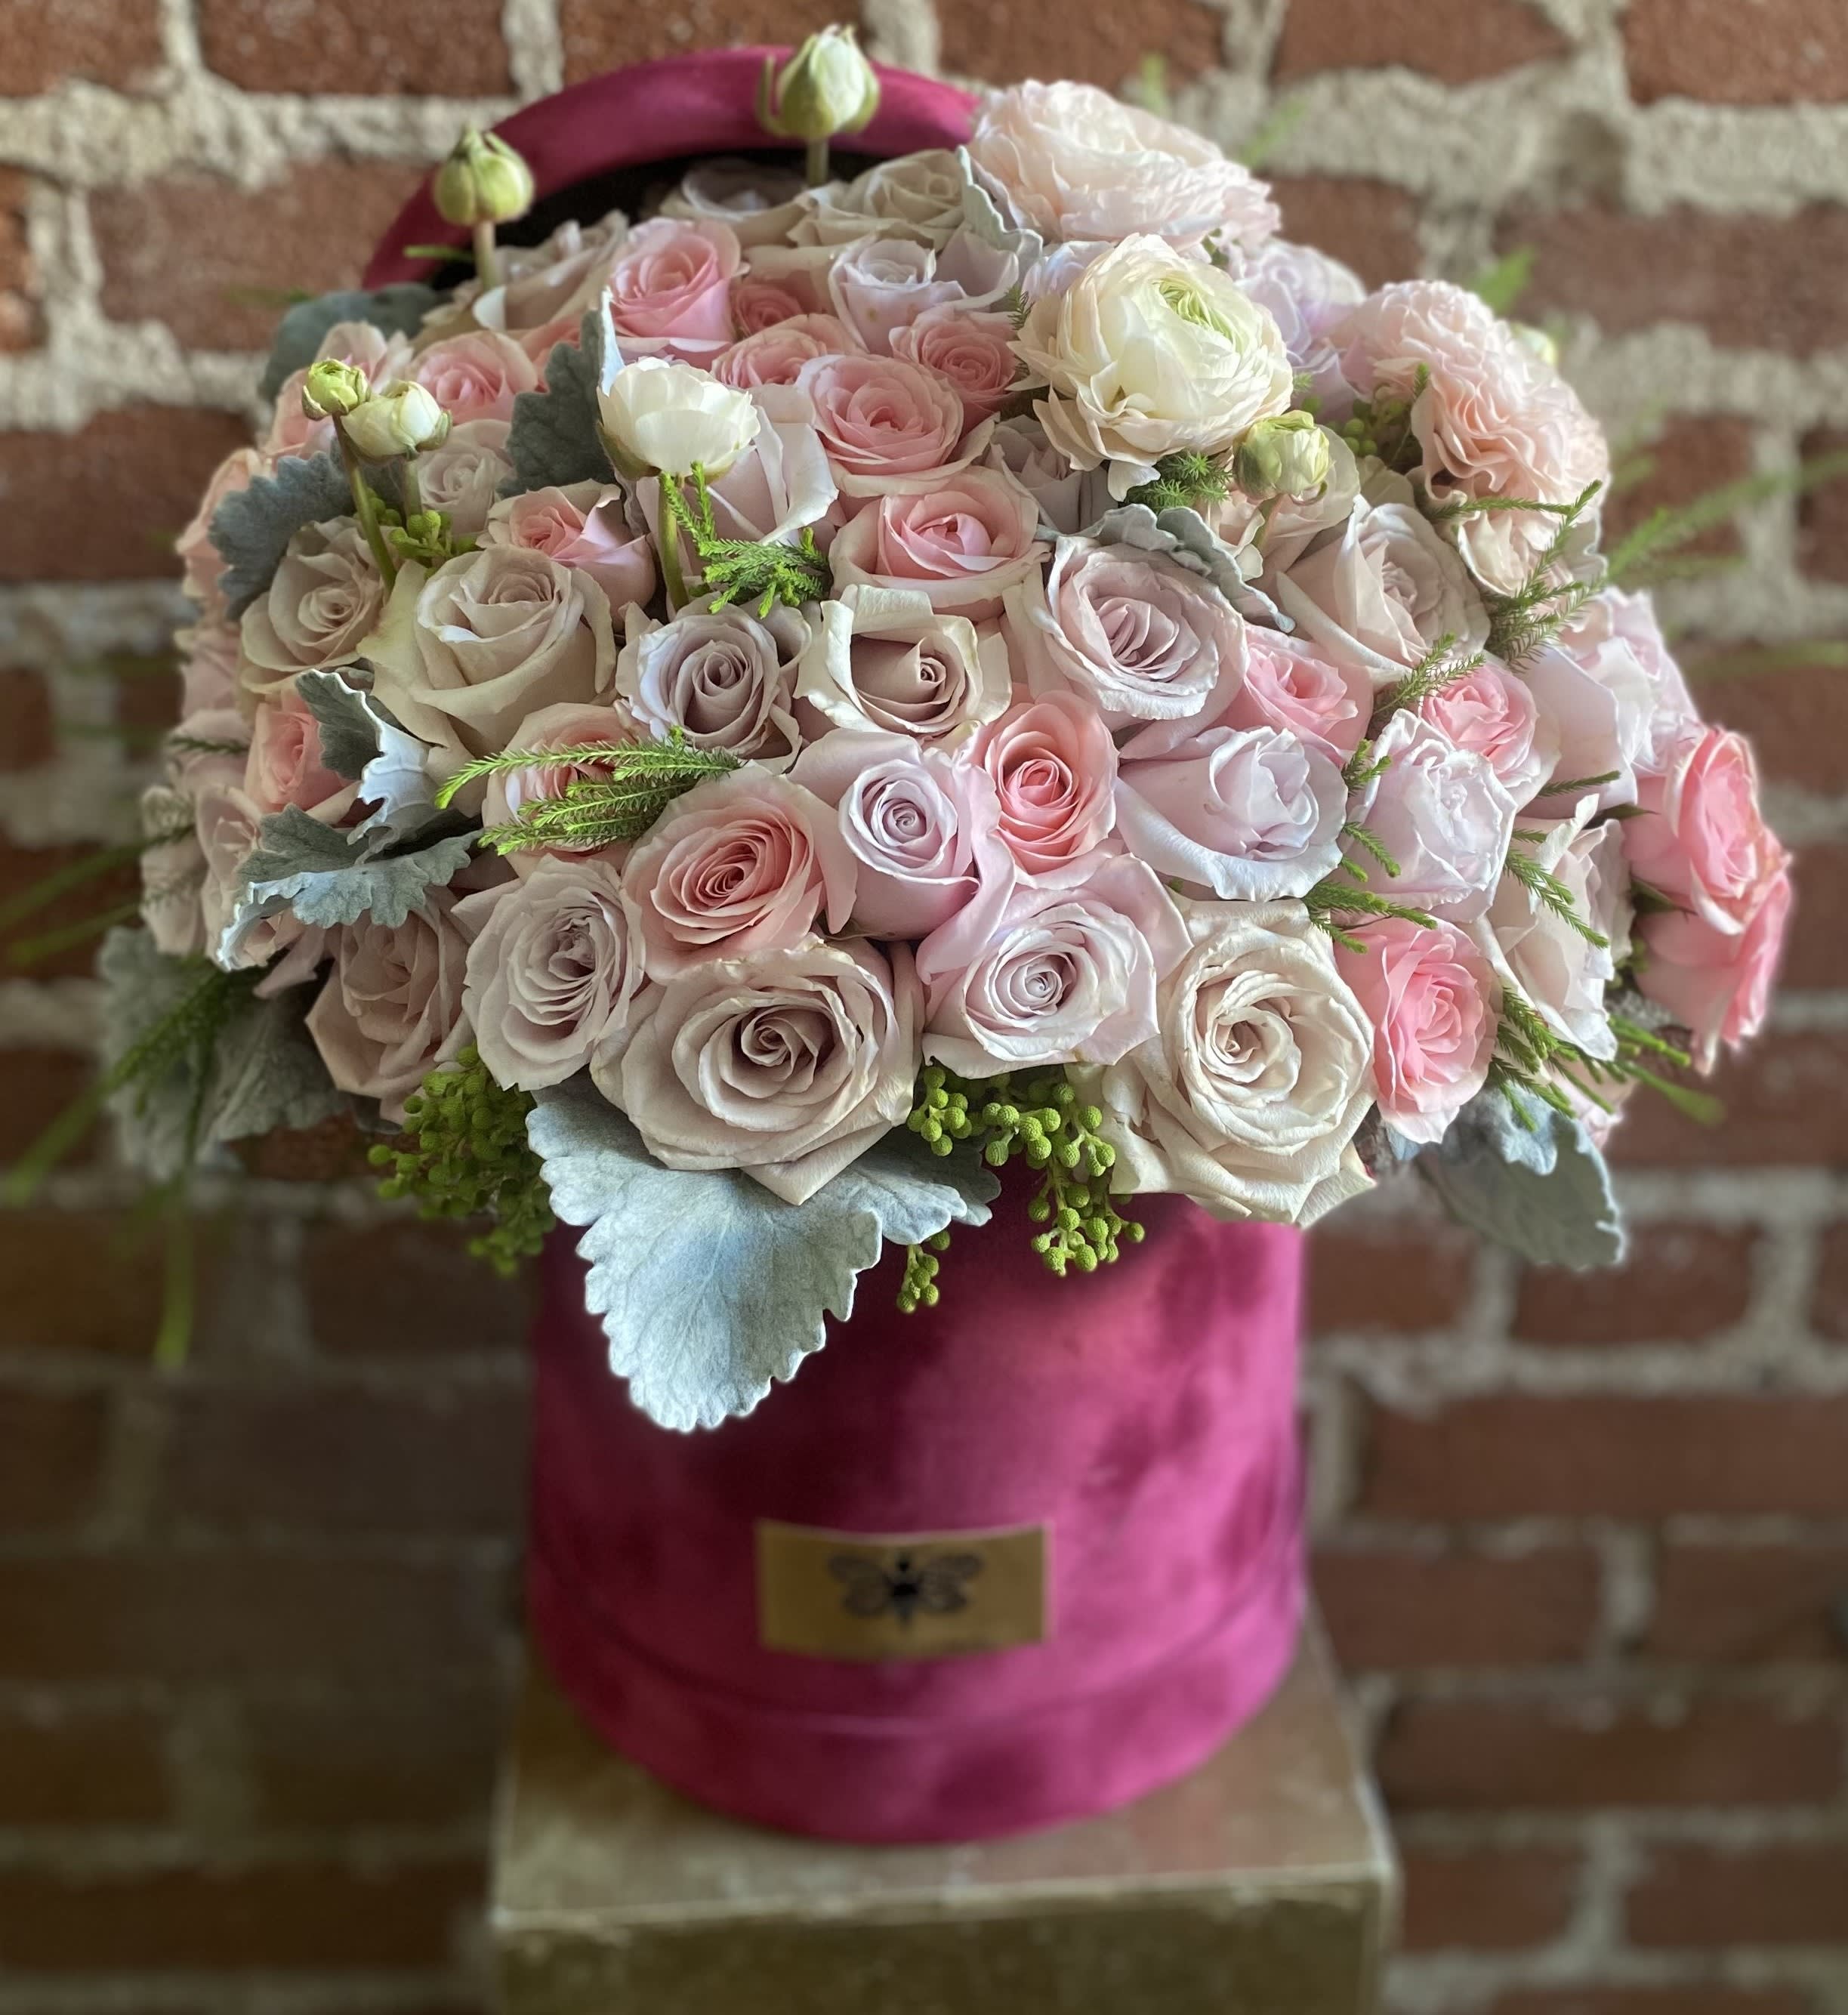 Amalfi - Buzzy Bee Flowers - Inspired by the beautiful City of Amalfi this arrangement will put a smile on a loved ones face. Filled with Pastel Colored Roses it is definitely a fan favorite and showstopper!